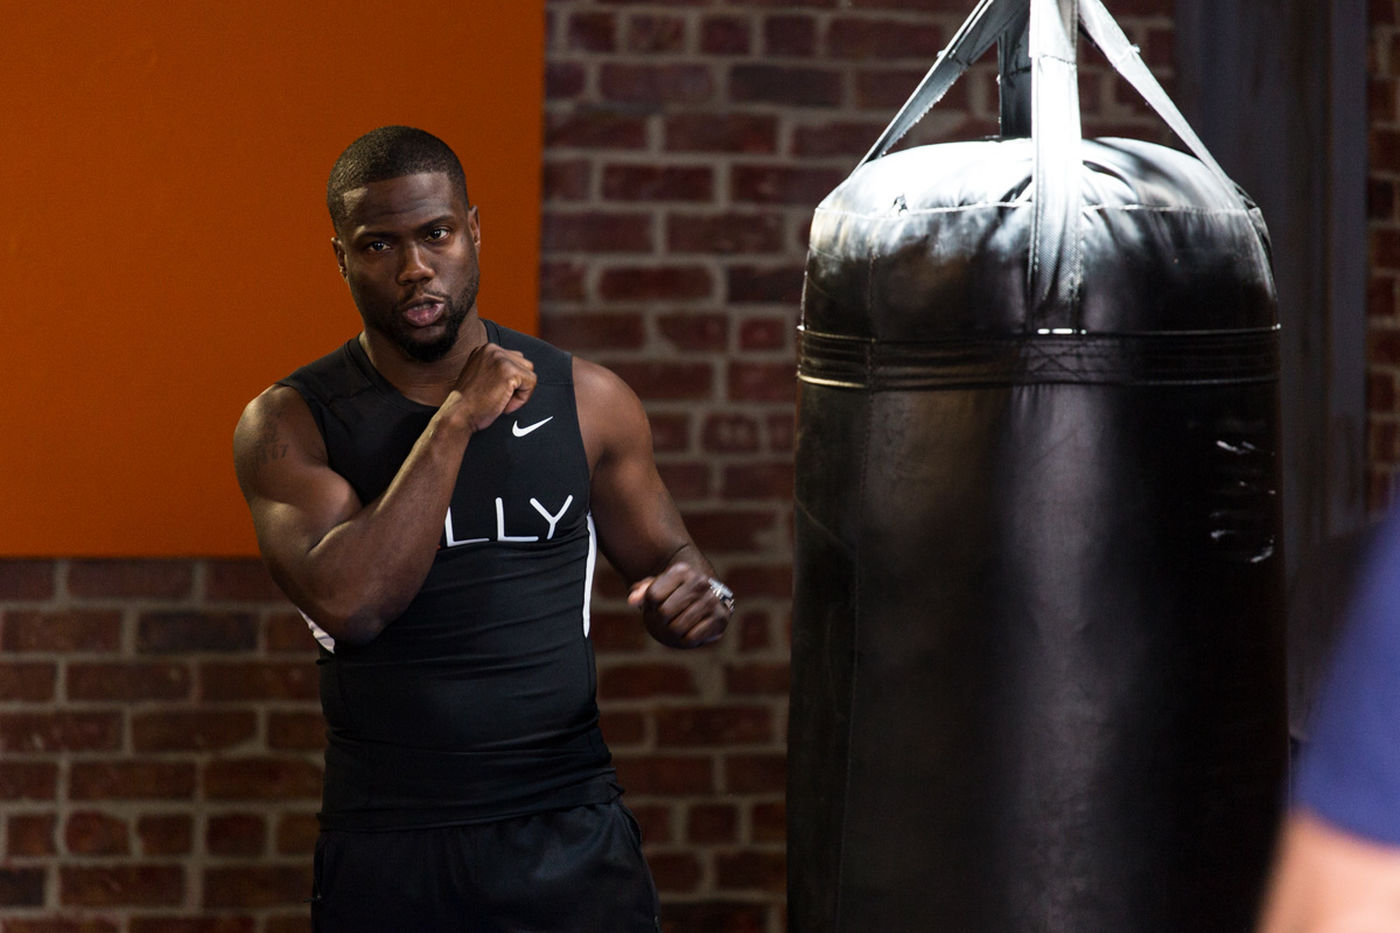 Antonio Esfandiari Says He Will Fight Kevin Hart for Money in Boxing Match Next Year